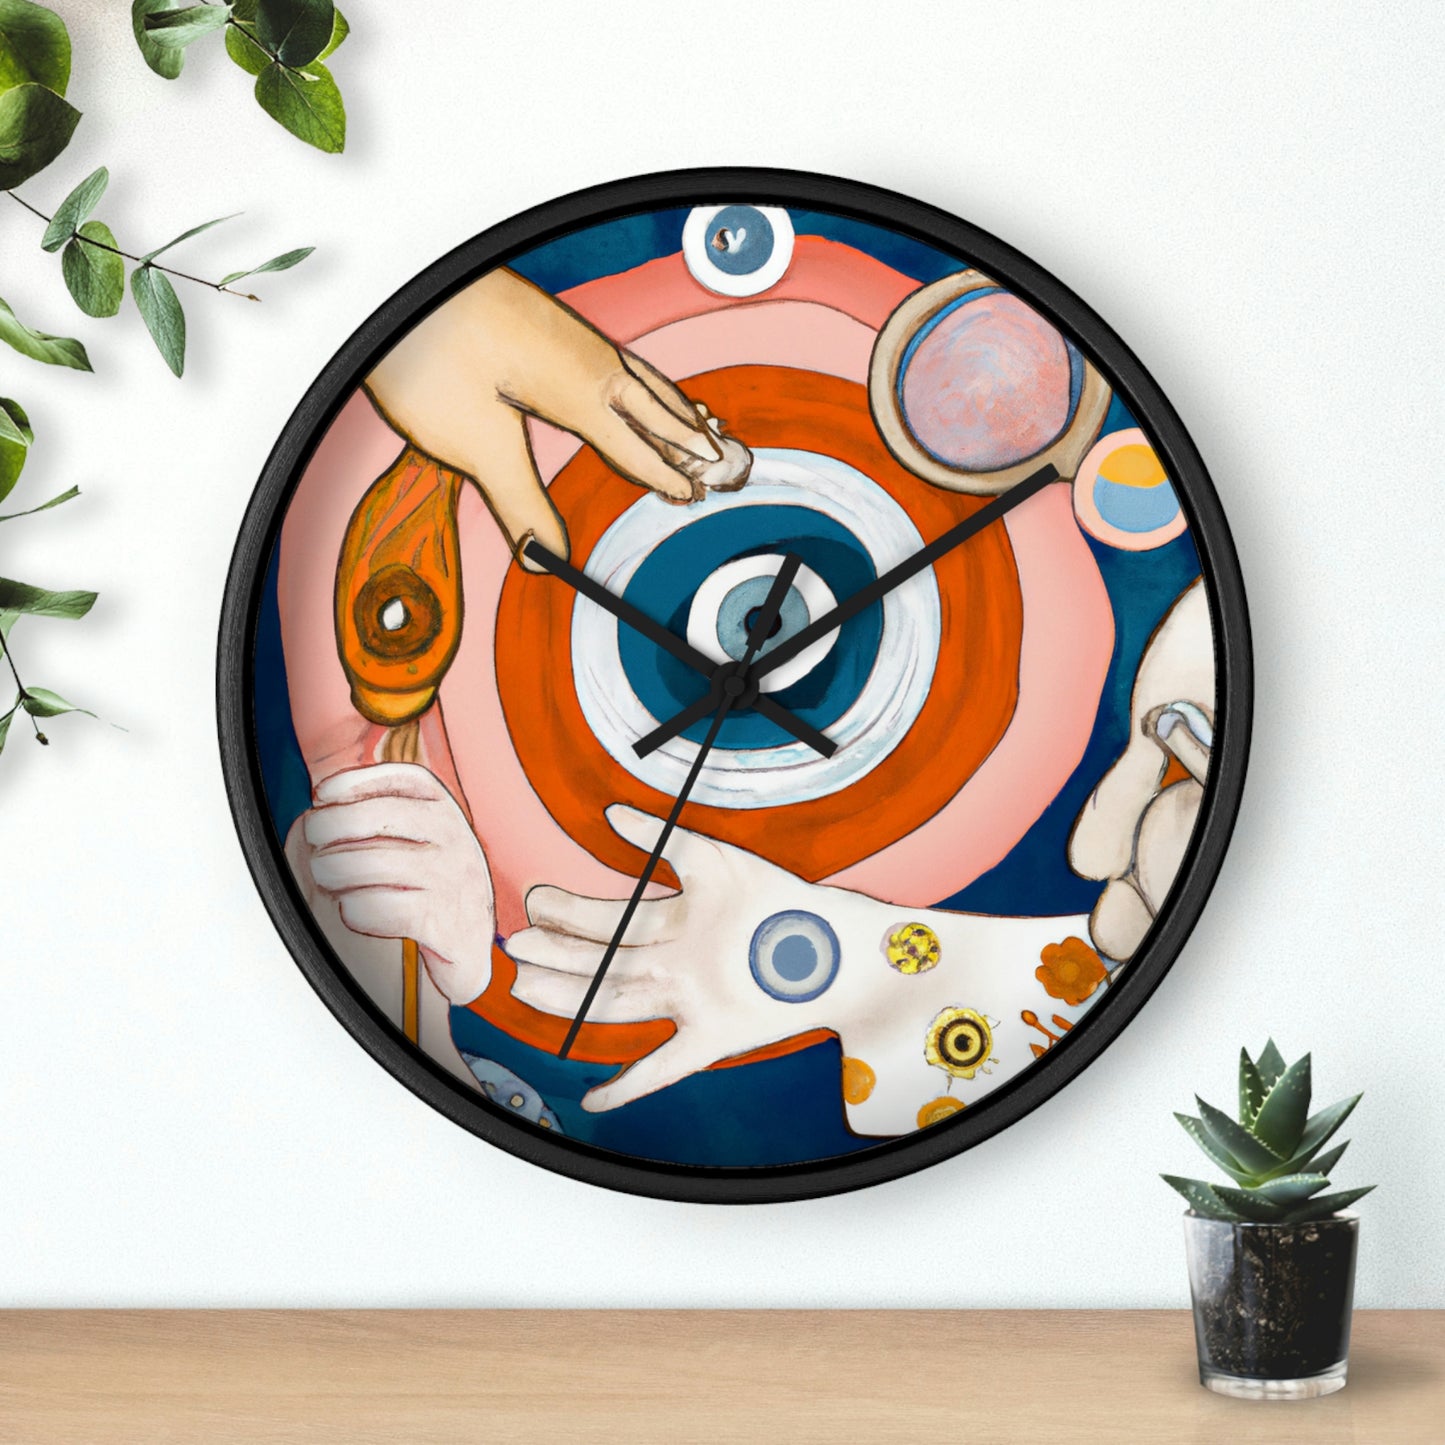 takes them on an adventure

A Twist of Magic: An Elderly Person's Unexpected Journey - The Alien Wall Clock